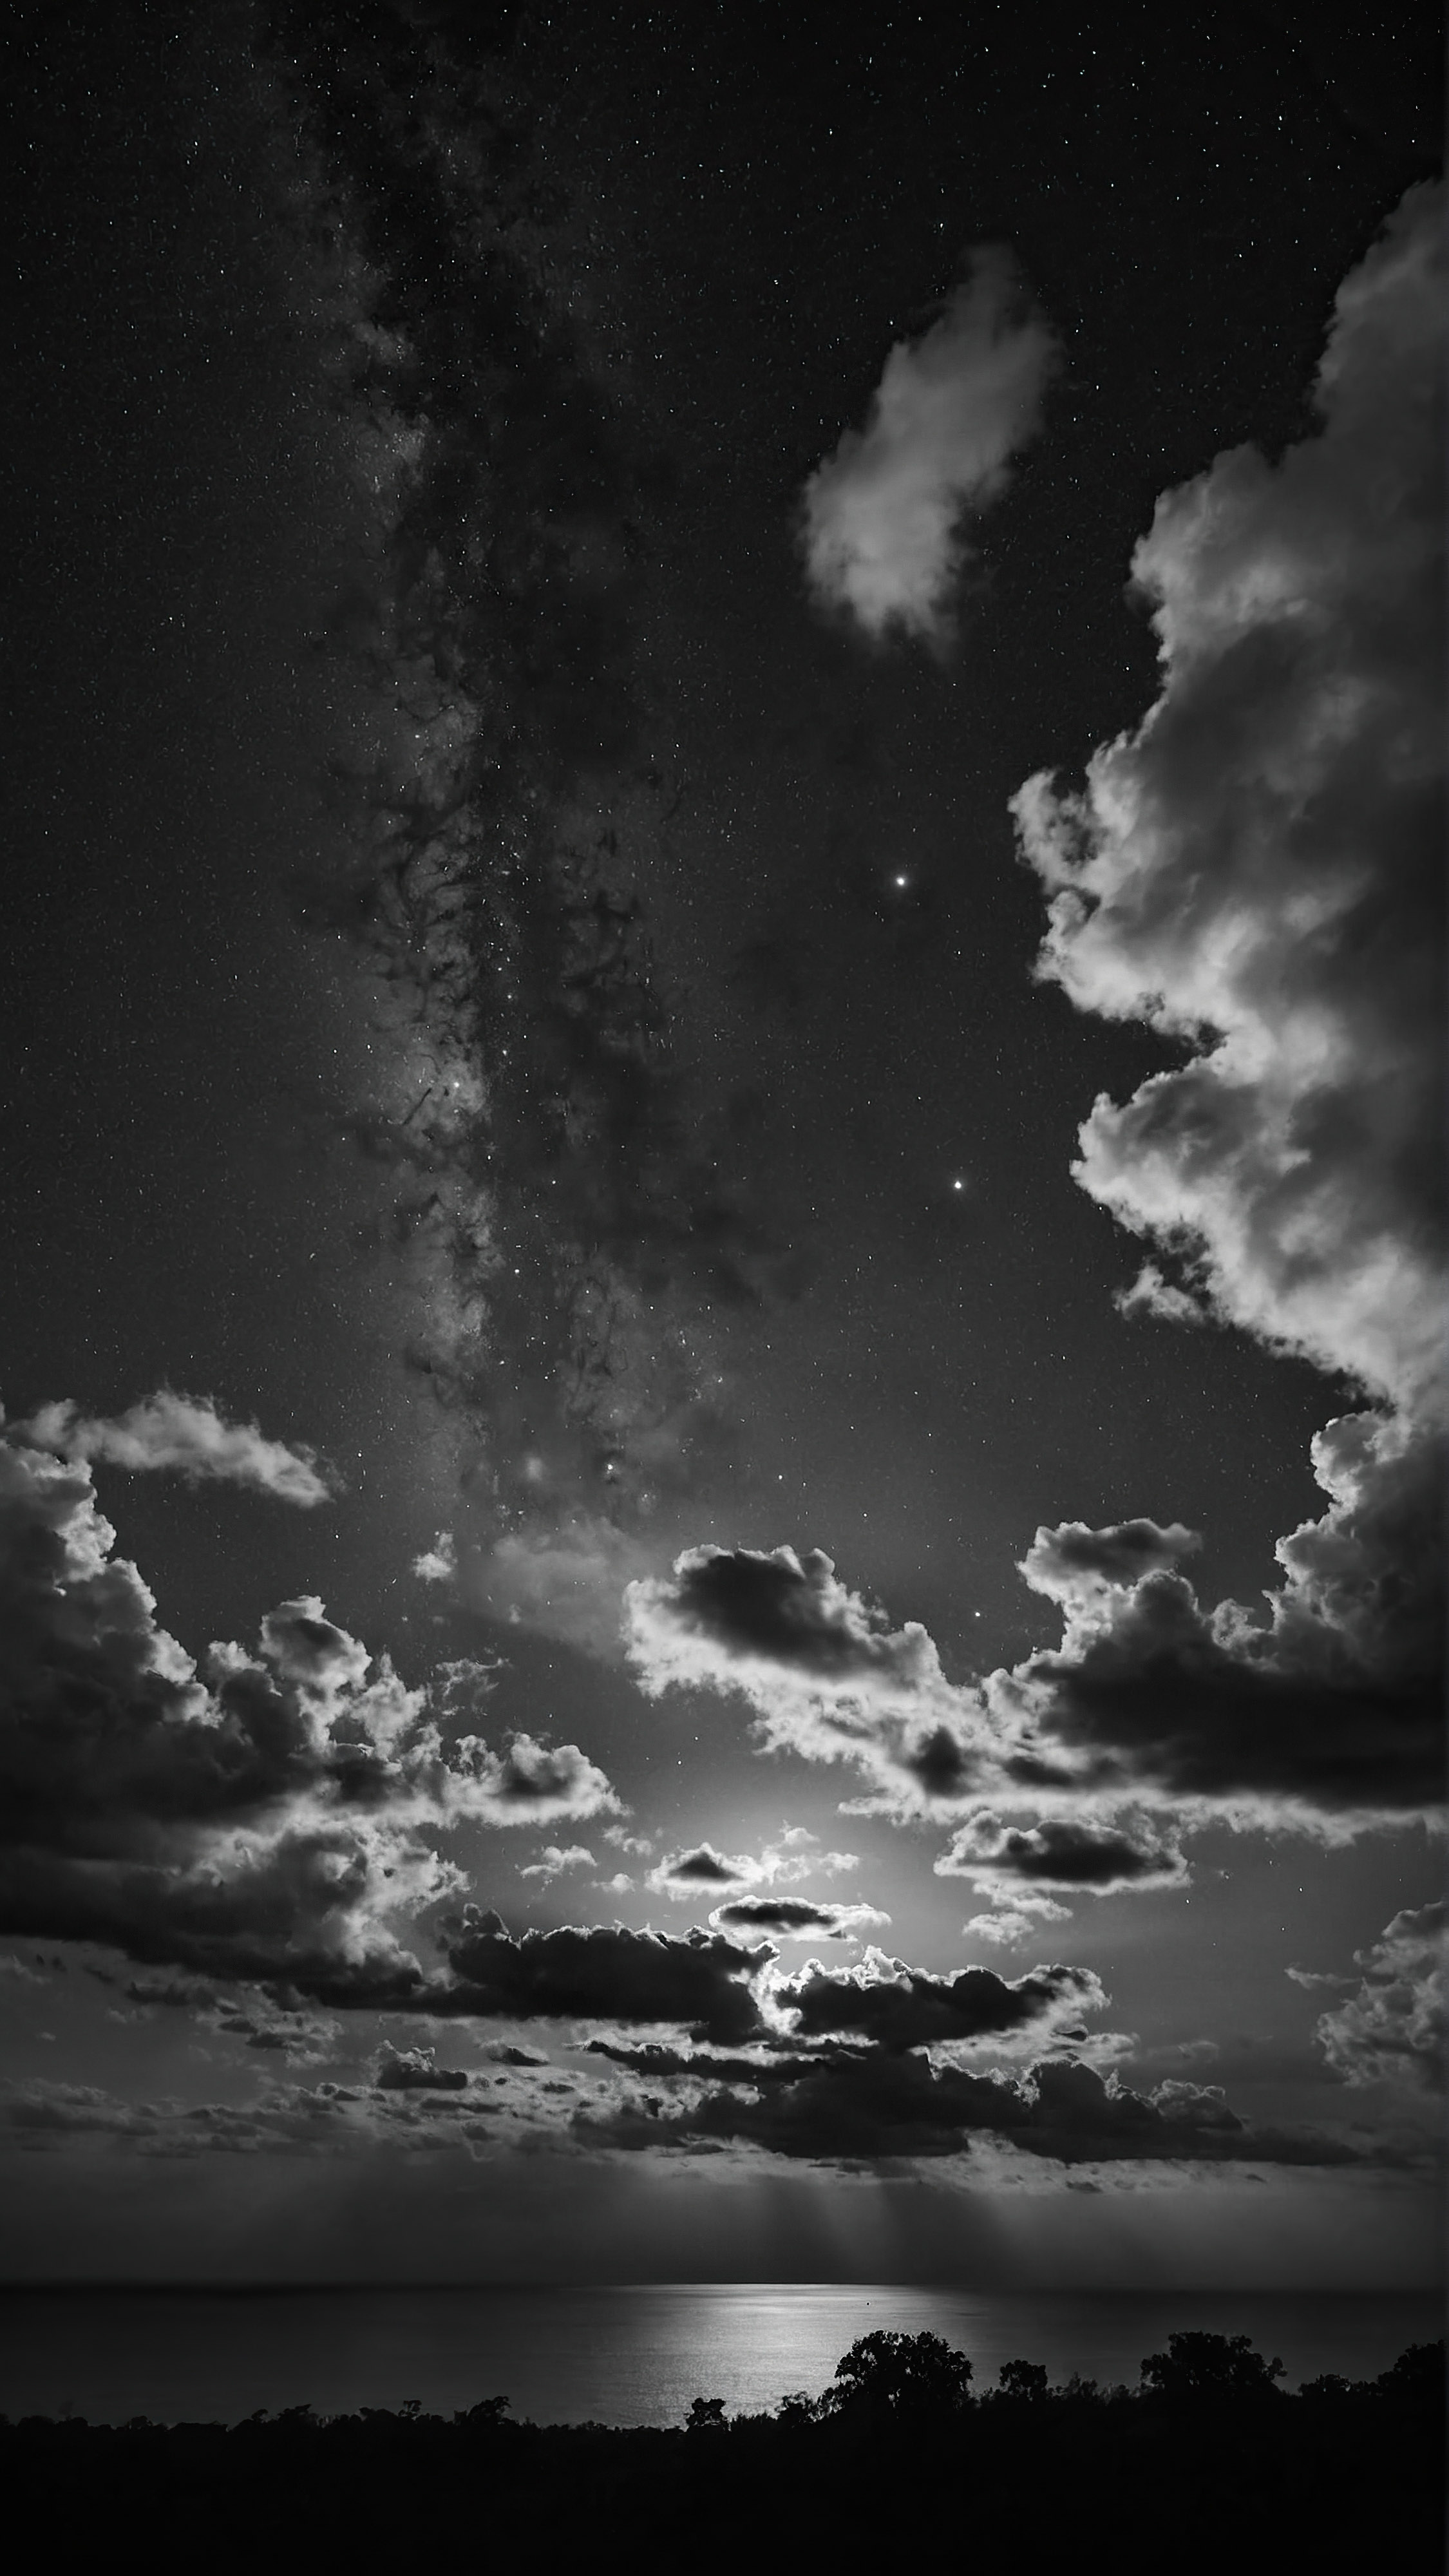 Experience the depth of a night sky, adorned with dense clouds and visible stars, through a 4K black iPhone wallpaper.